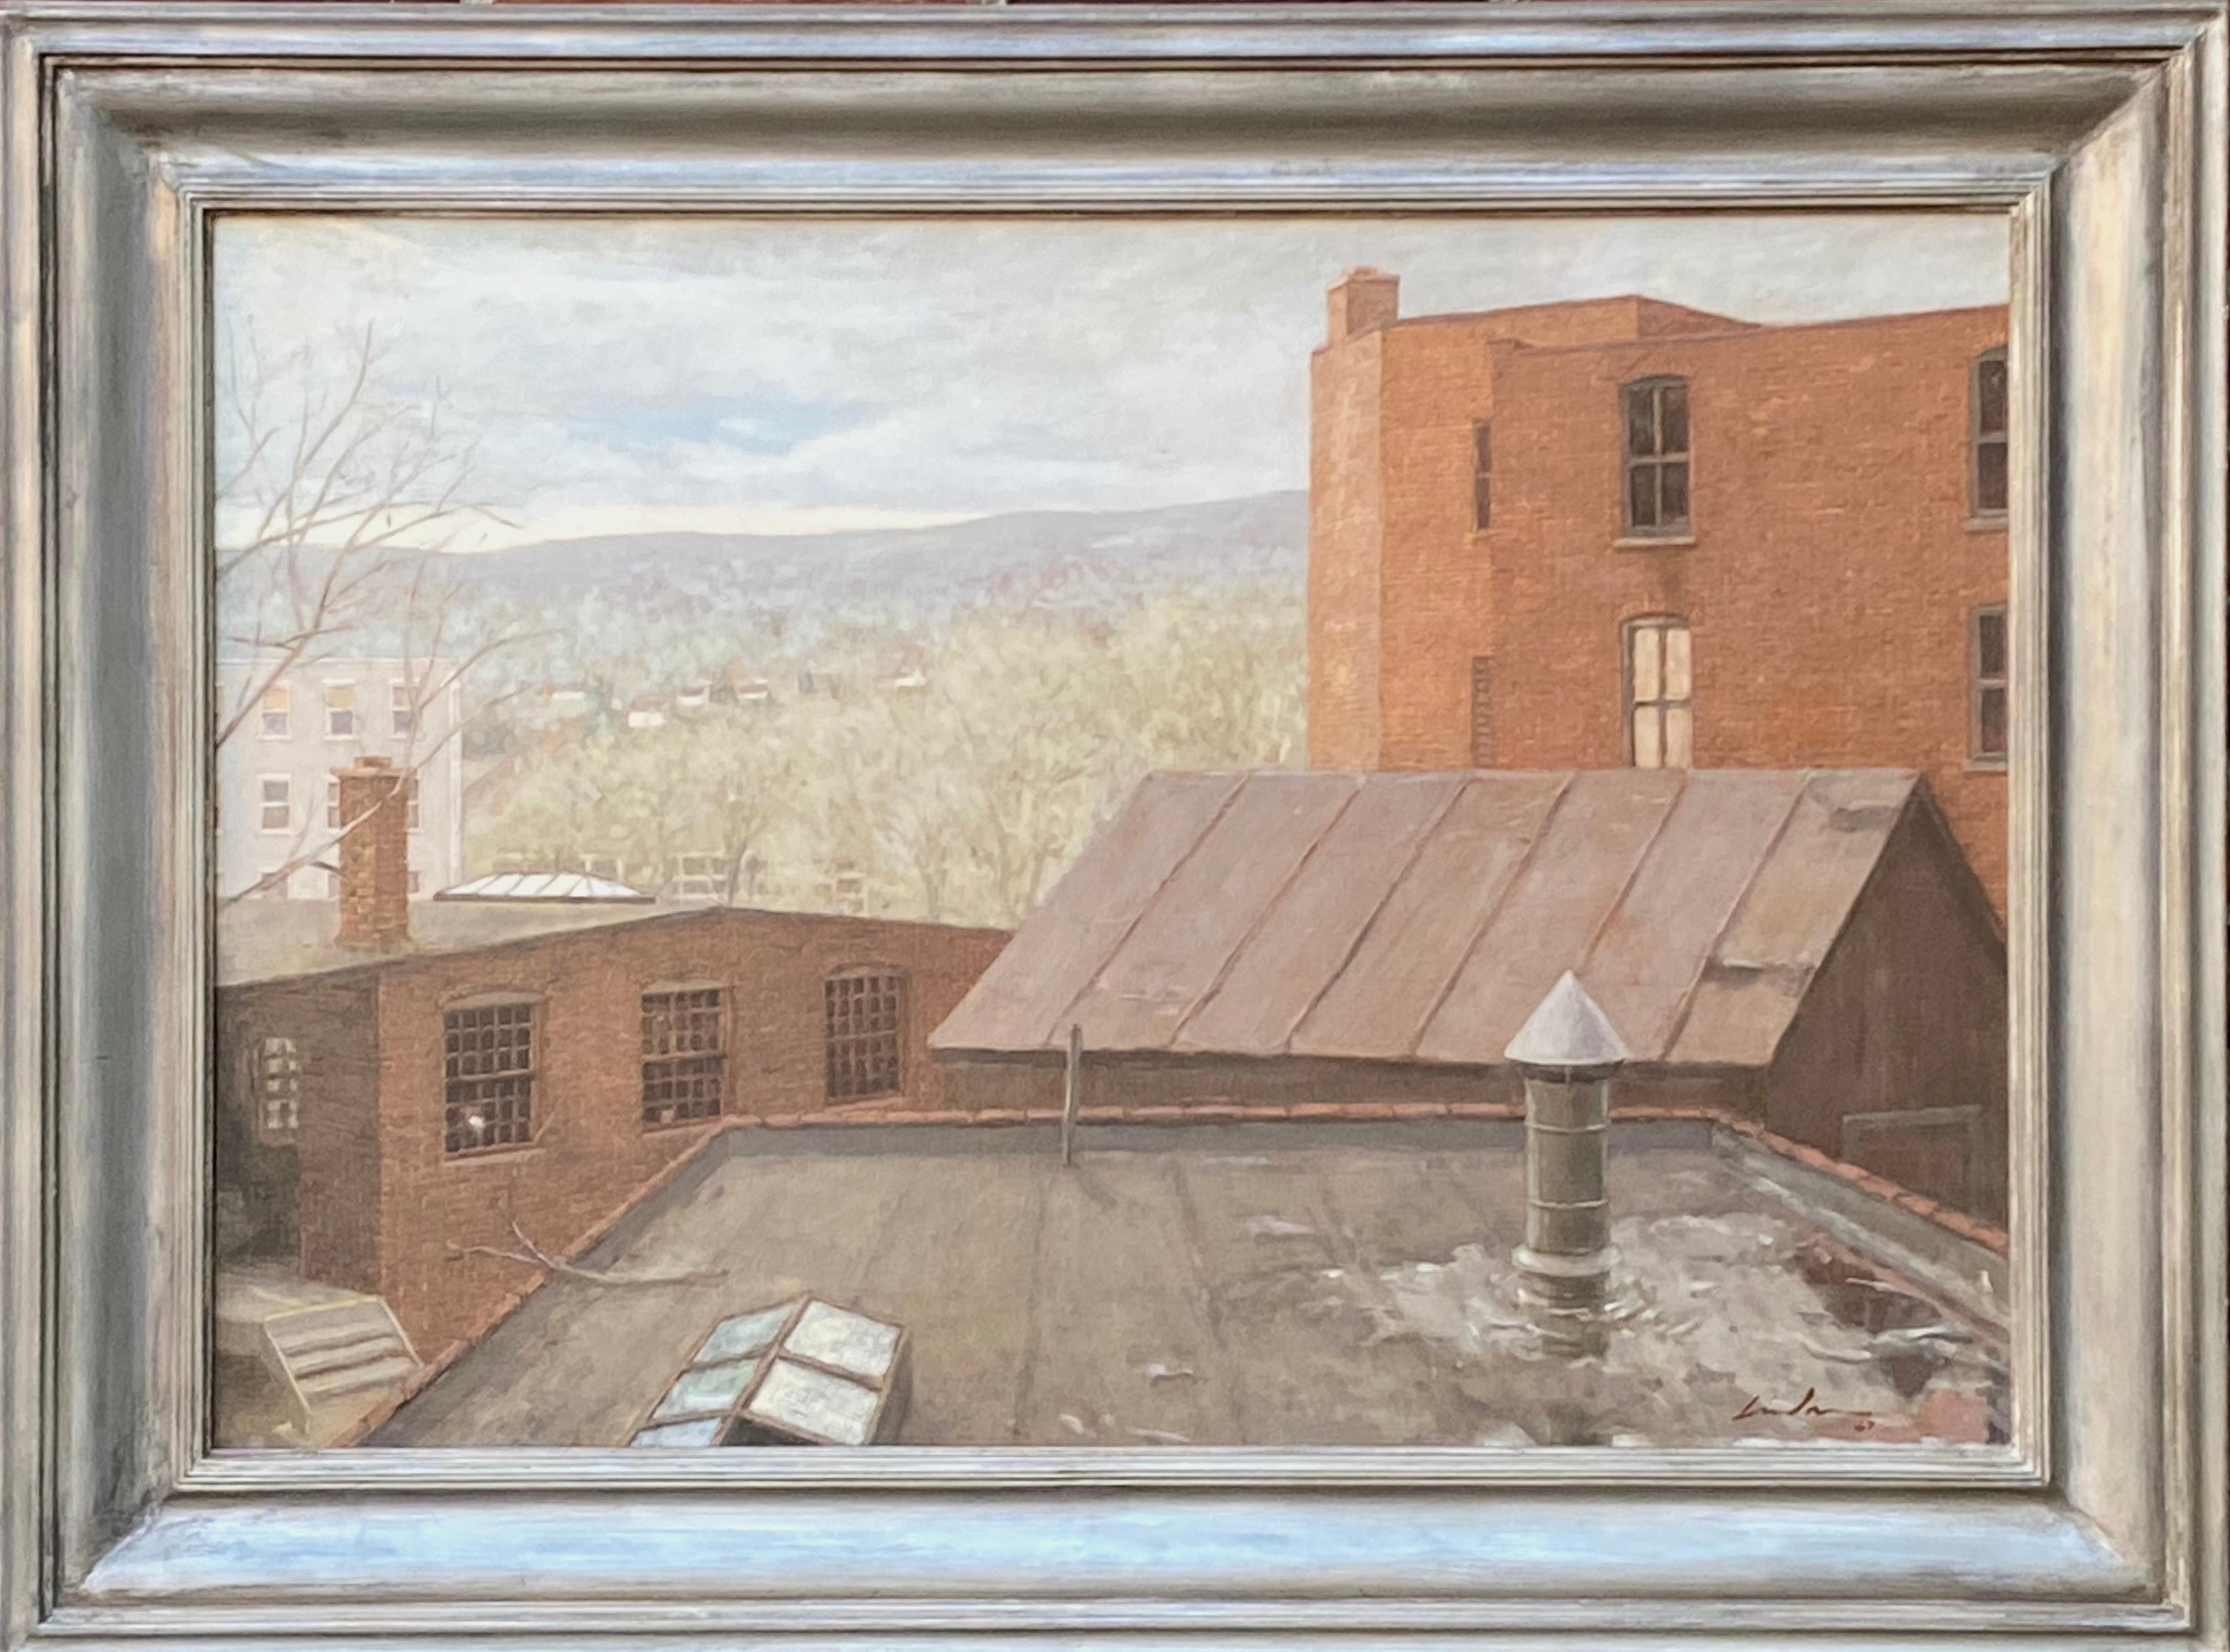 Linden Frederick Landscape Painting - "Factory Town" Contemporary American Industrial Oil Painting Maine 1987 Realism